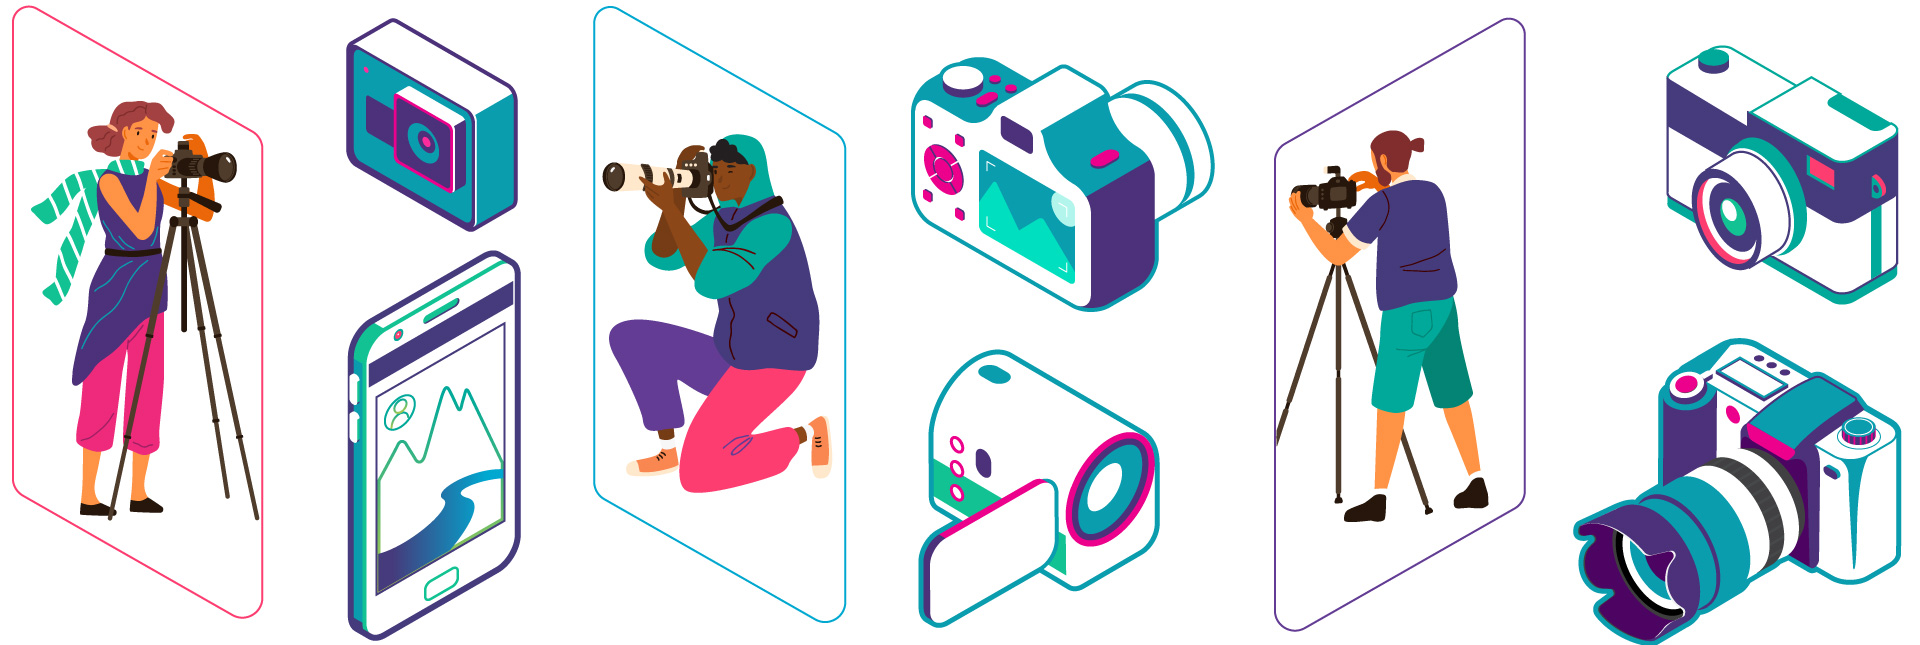 Collage of cameras and photographer illustrations